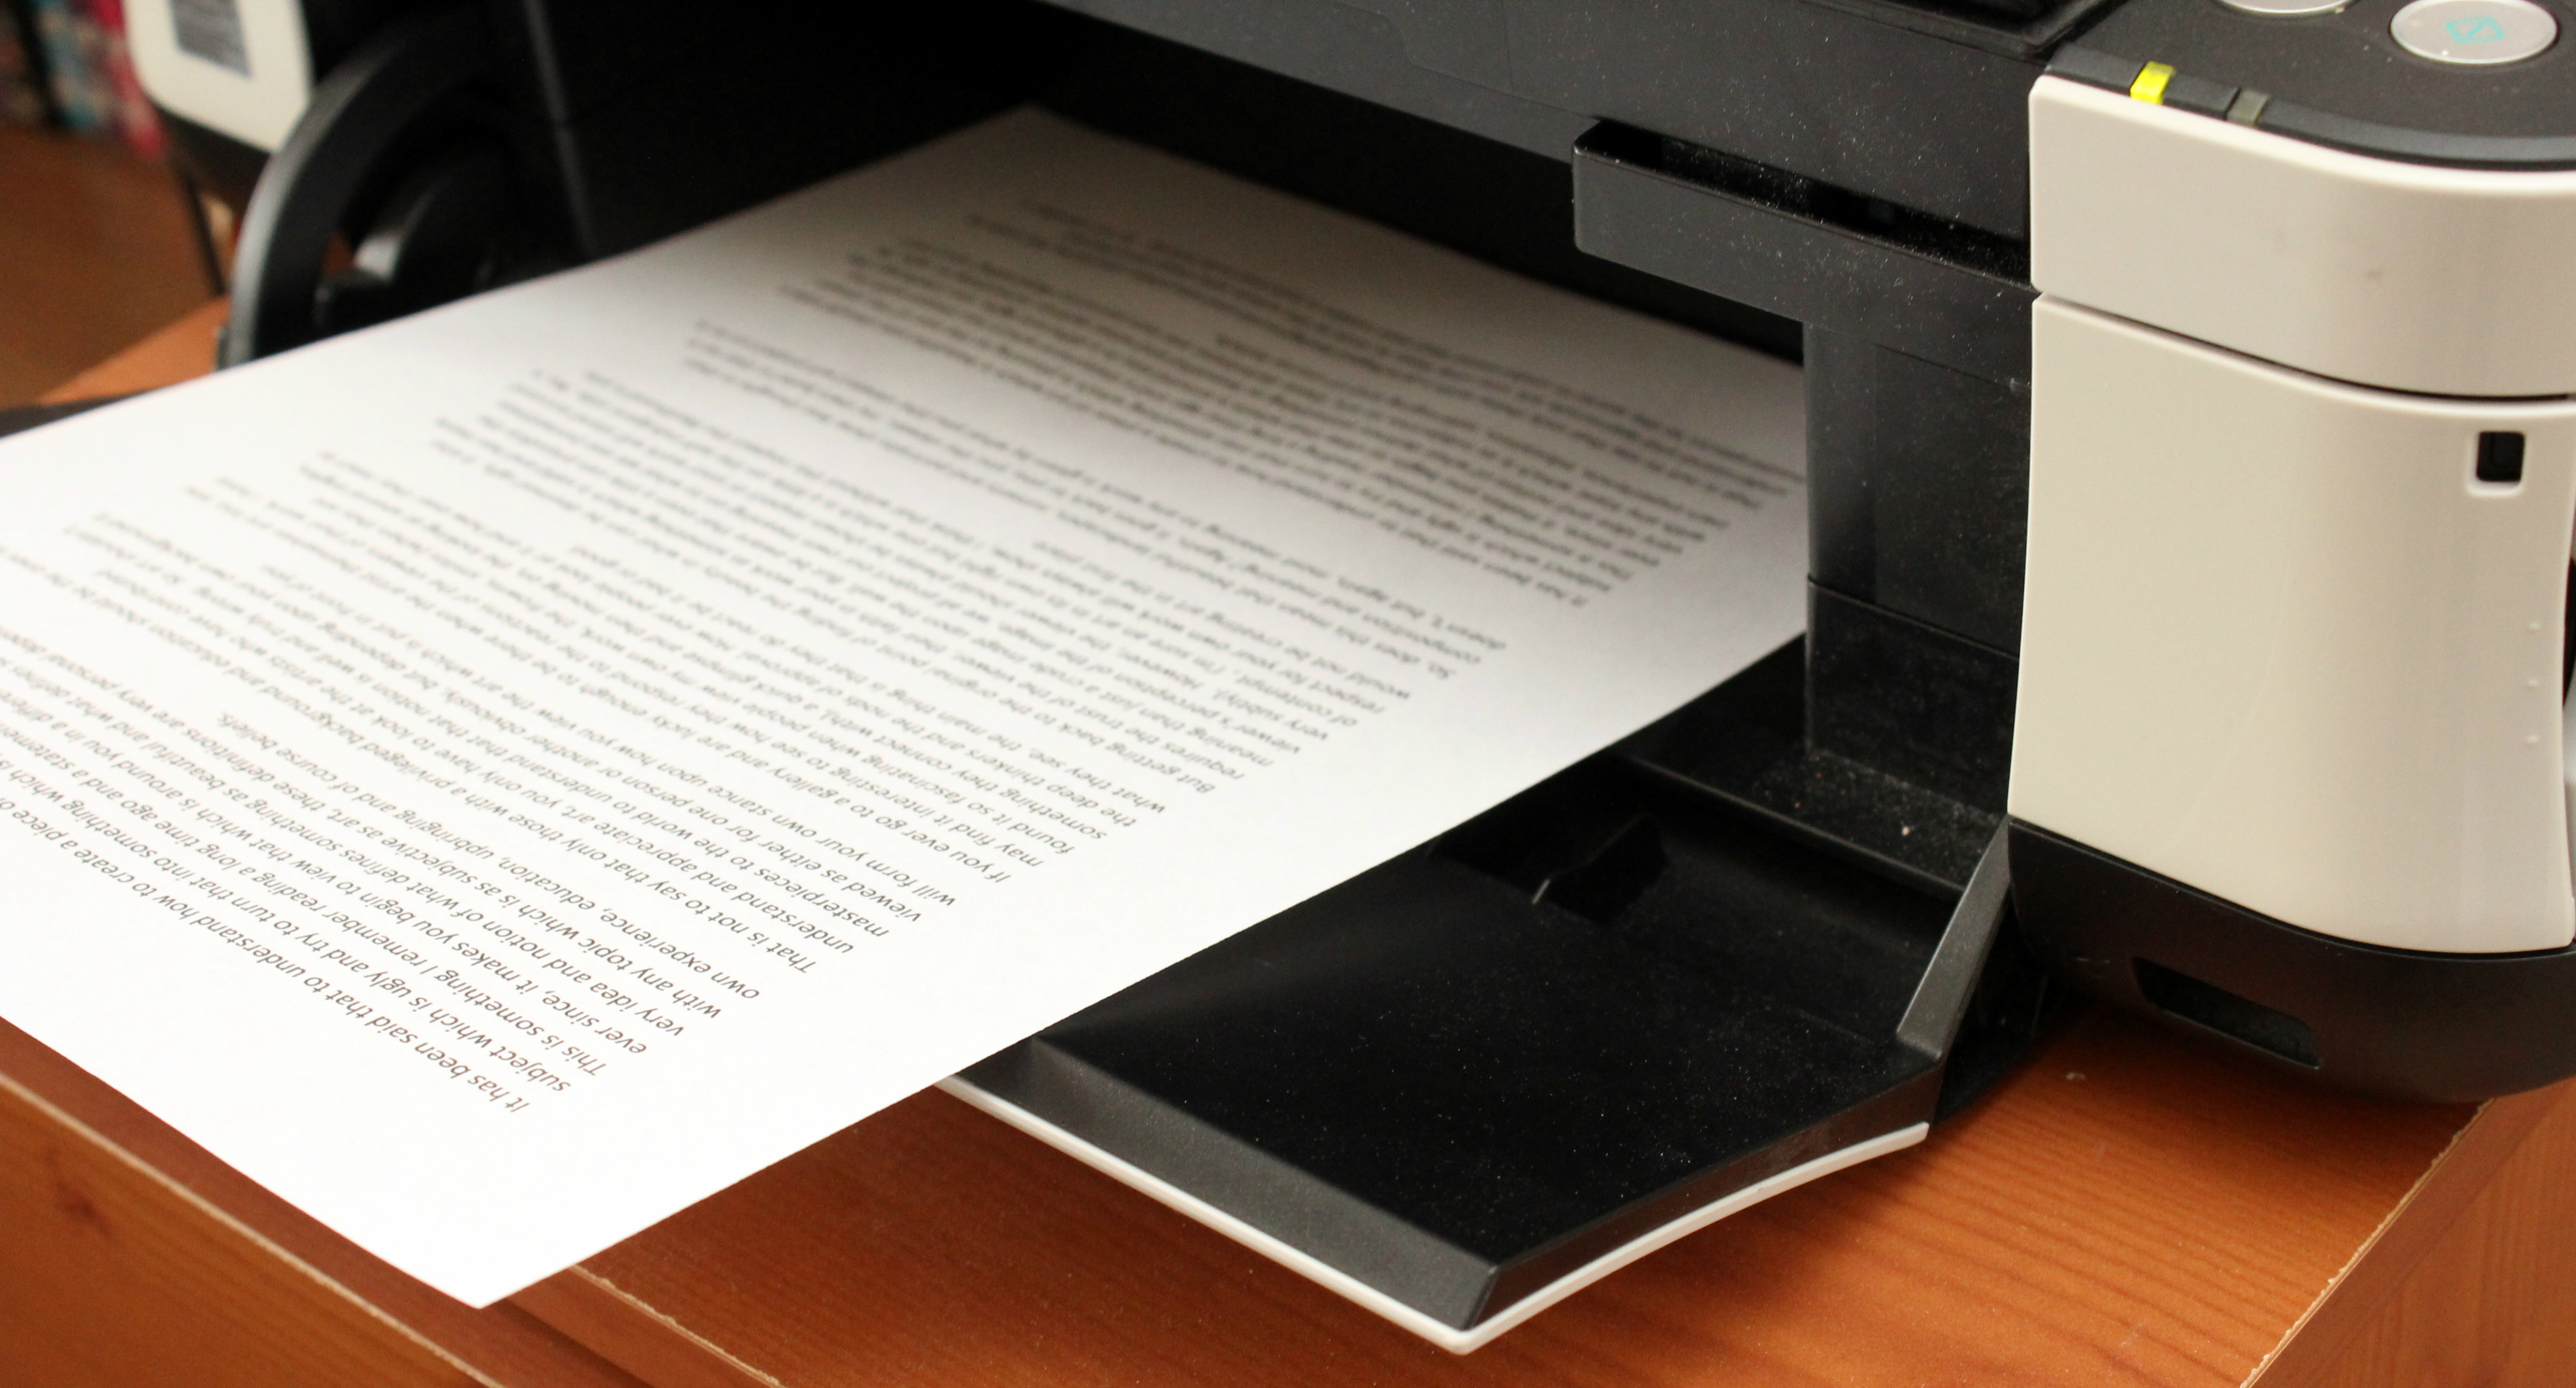 10 ways to save big on printer ink and toner – a printed page with text